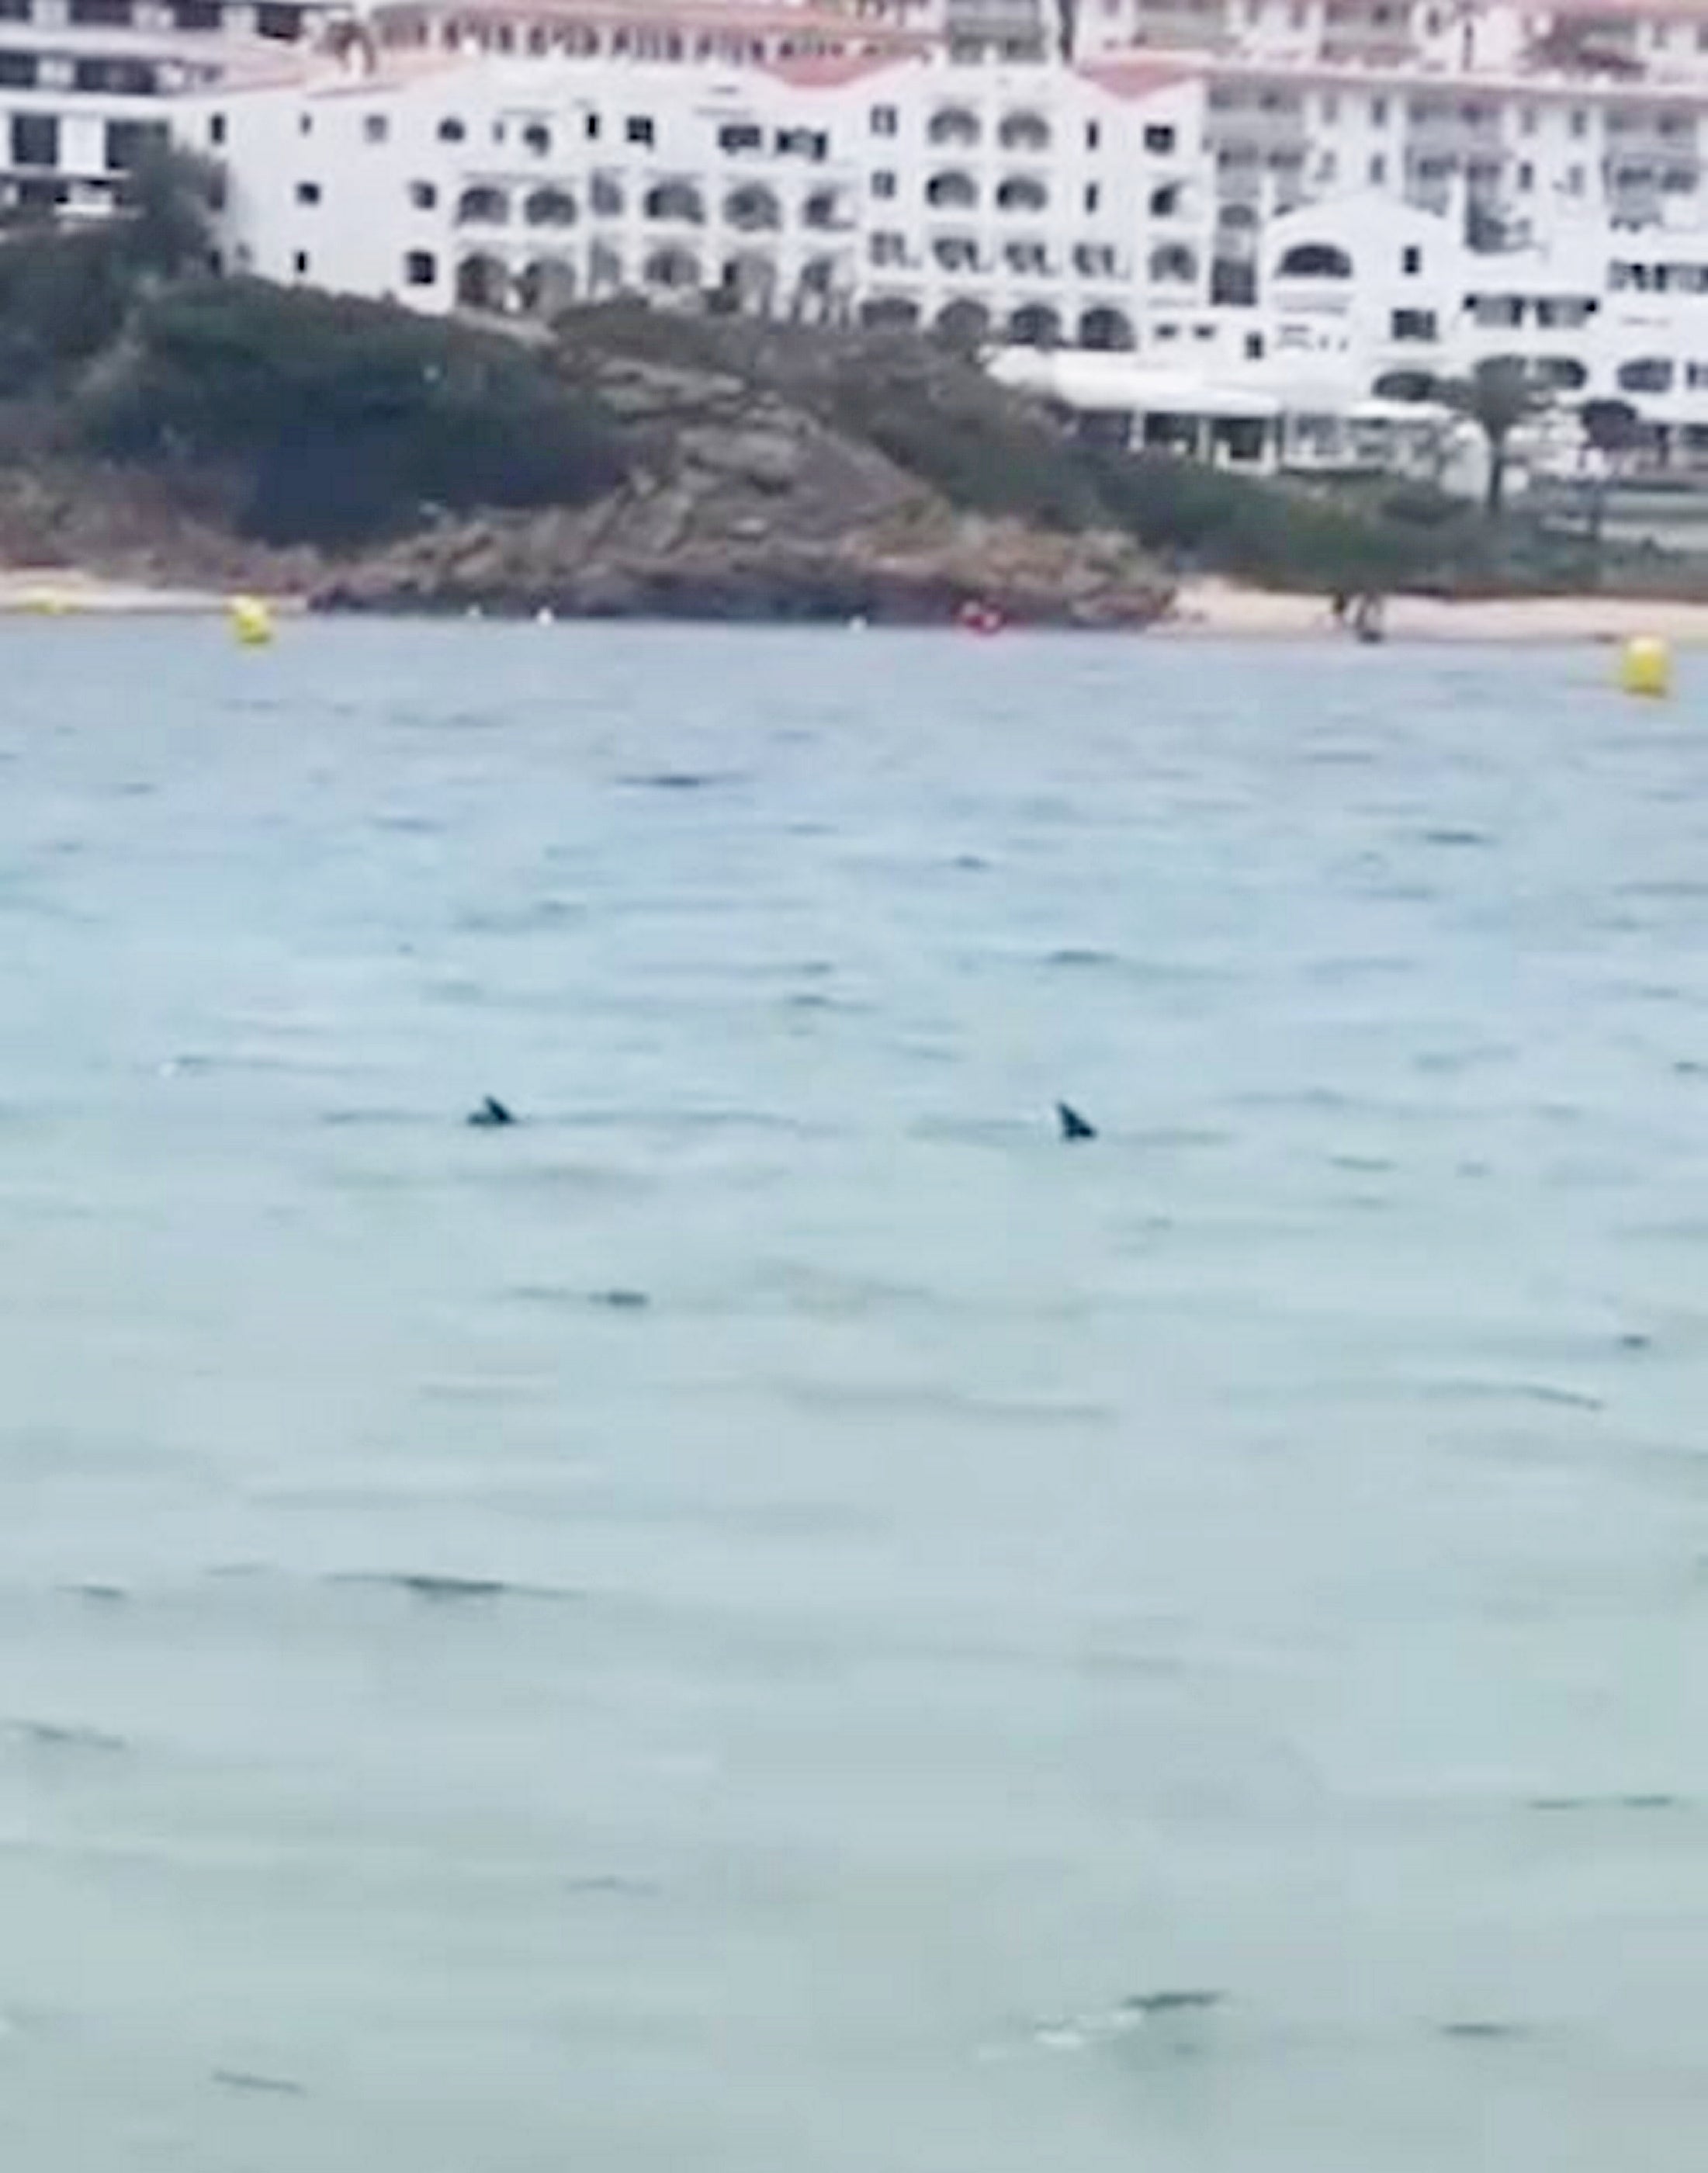 Children were evacuated from the sea, but others were allowed to come close enough to video the shark